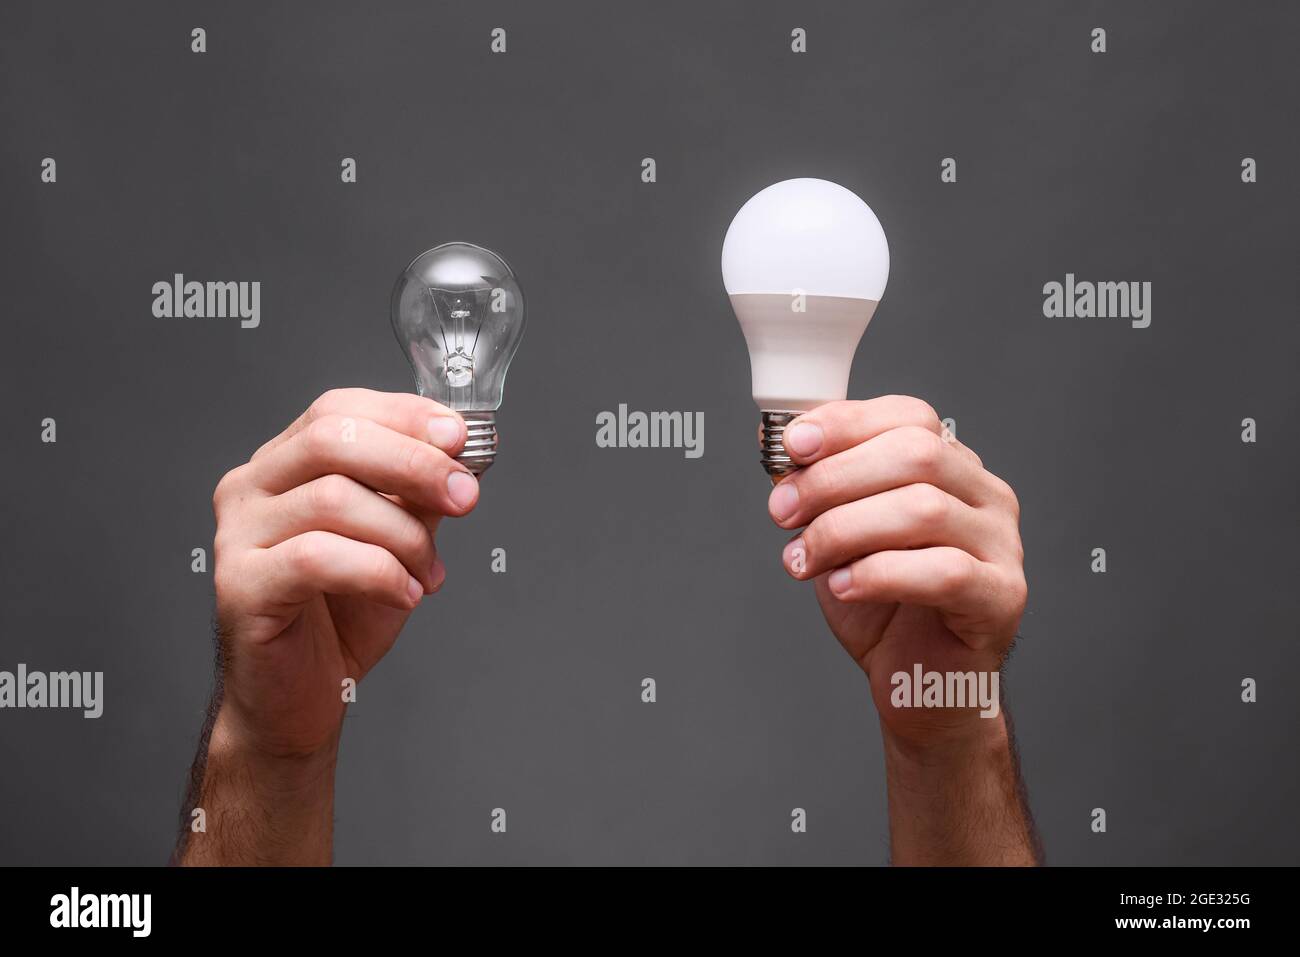 incandescent lamp and led economical lamp in the hands on a gray background.  Stock Photo